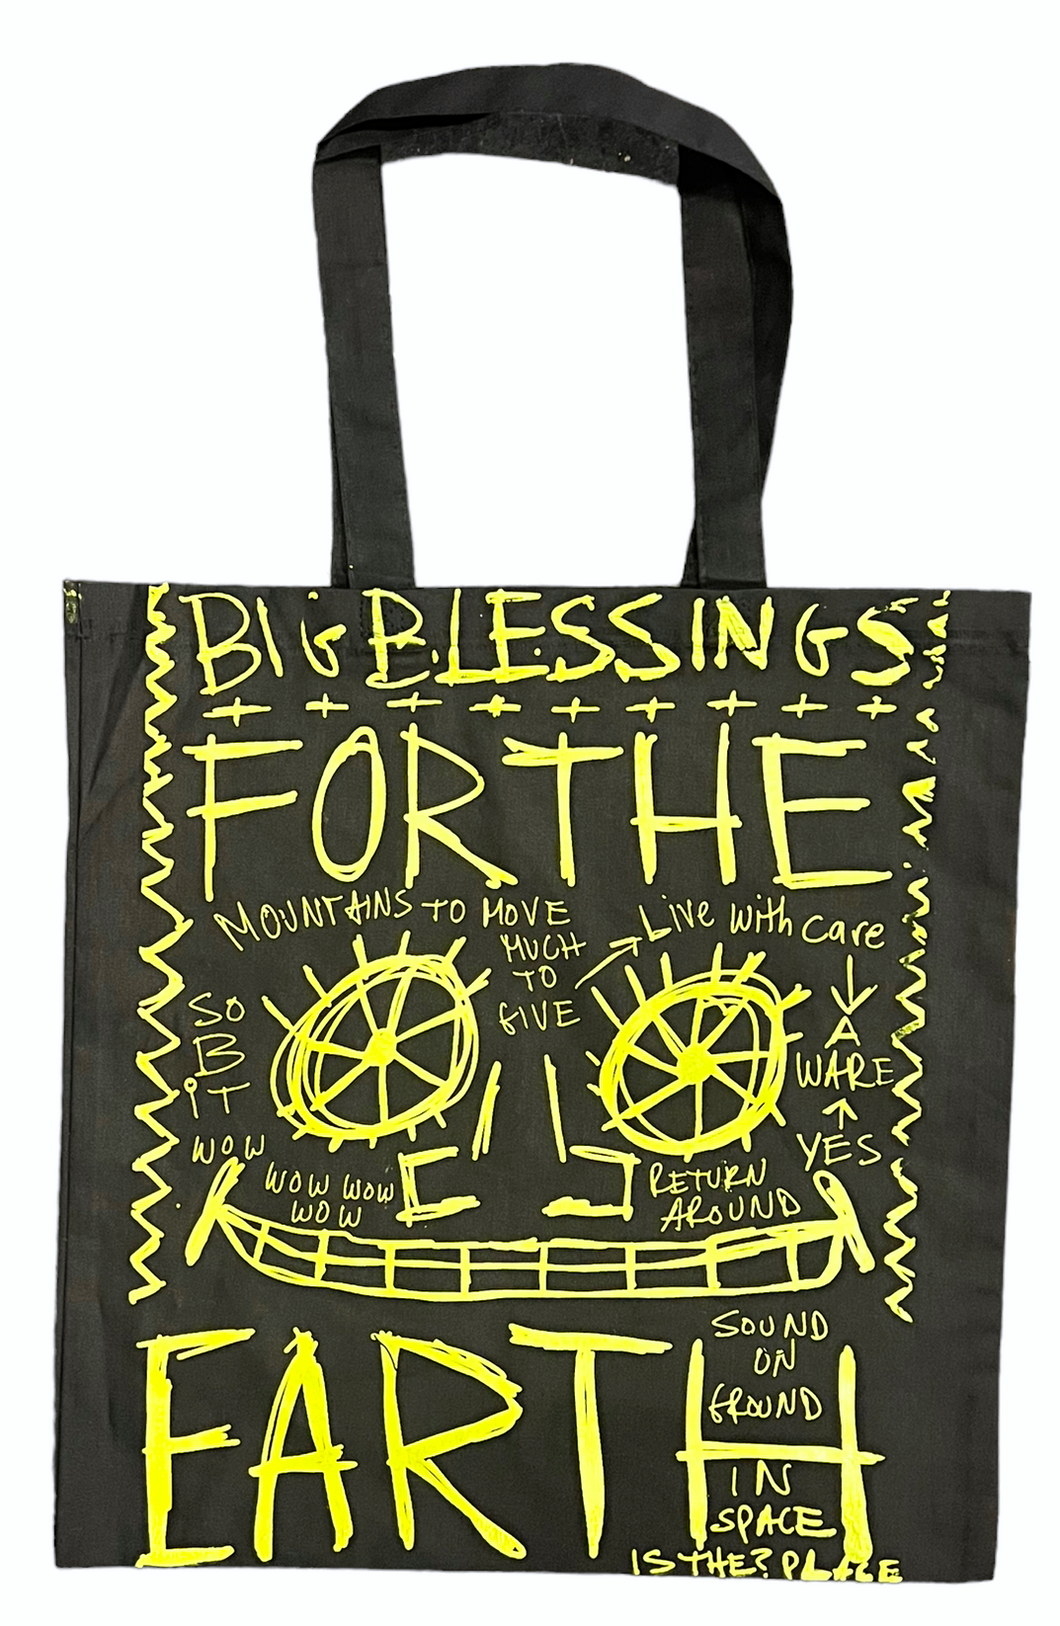 Earth Blessings Tote Bag (Size Large)